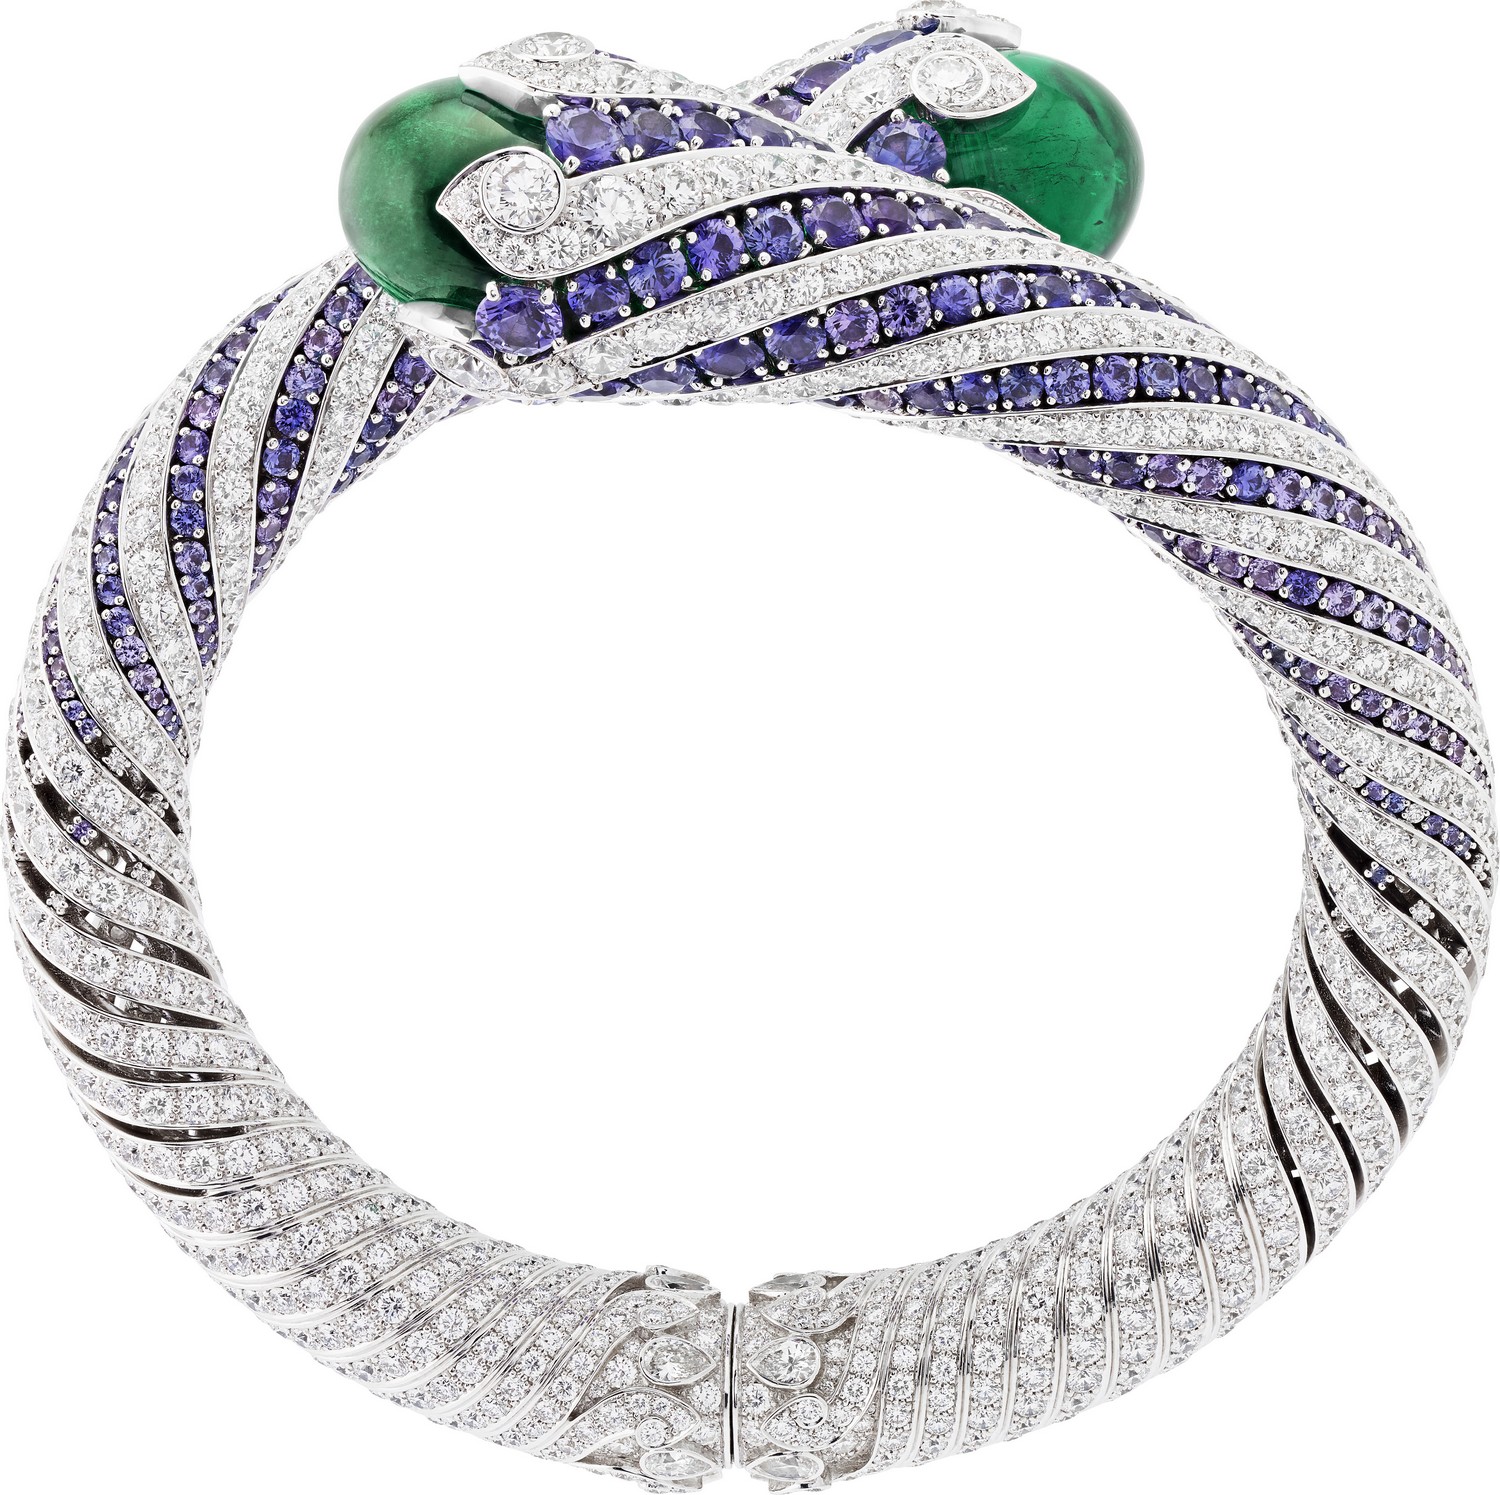 White gold, round diamonds, round mauve sapphires, 2 cabochon-cut emeralds of 19.80 and 21.48 carats (Colombia).